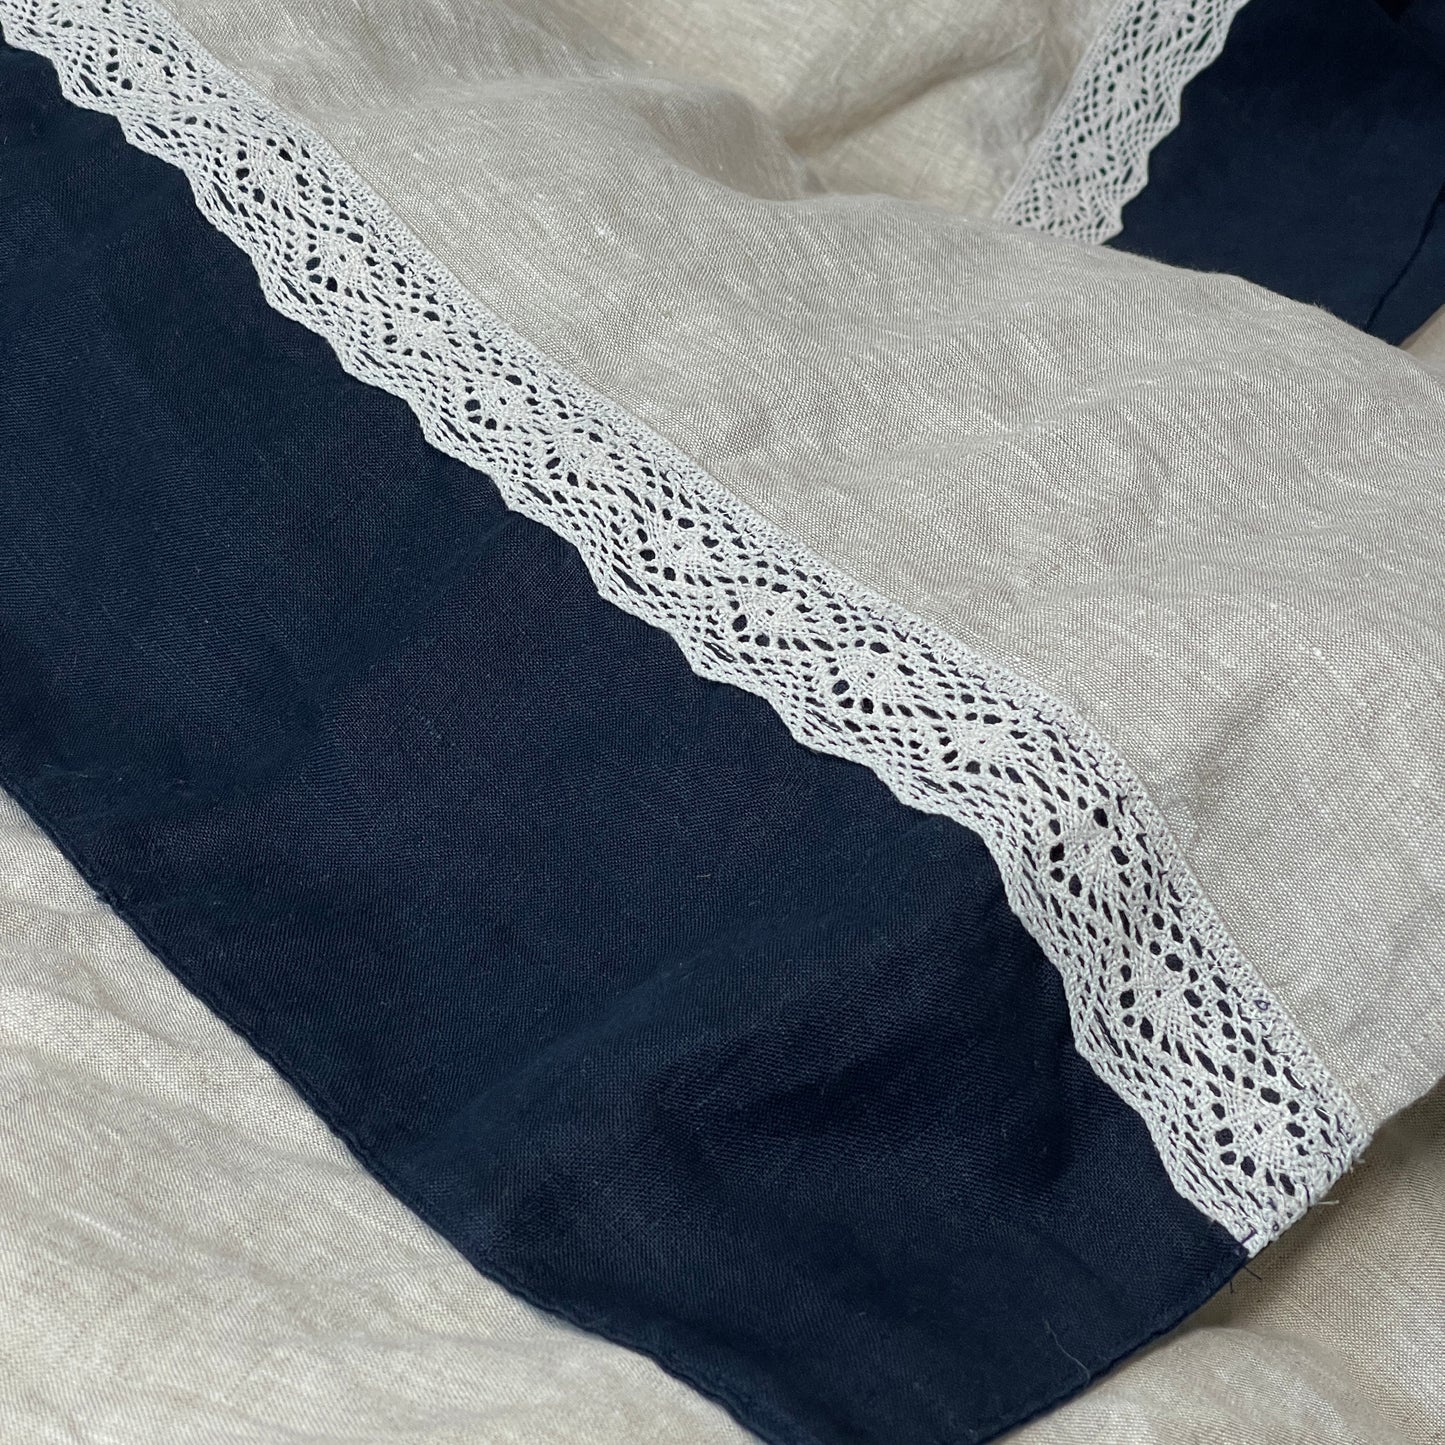 Greige Navy Blue Flat Sheet with Lace